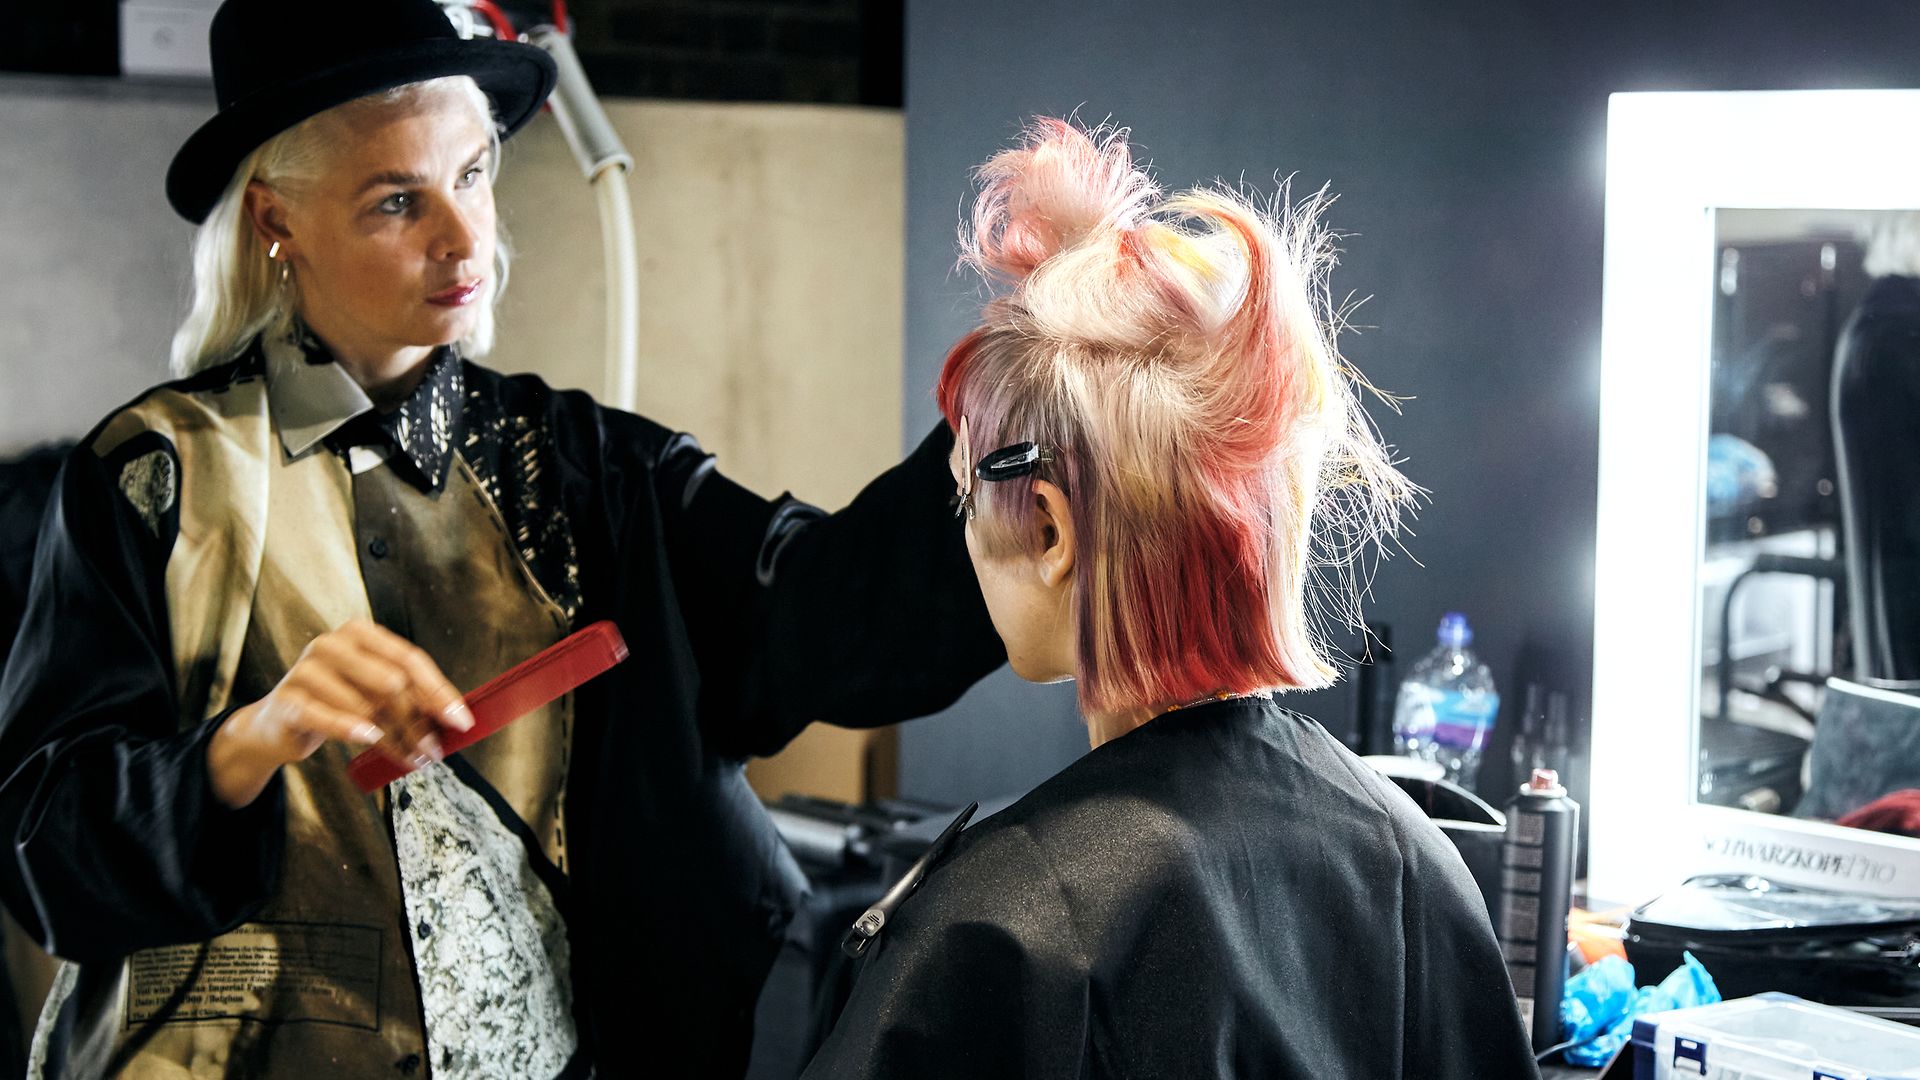 Schwarzkopf and Dazed create HEADtoHEAD, an inspirational day for readers and hair professionals